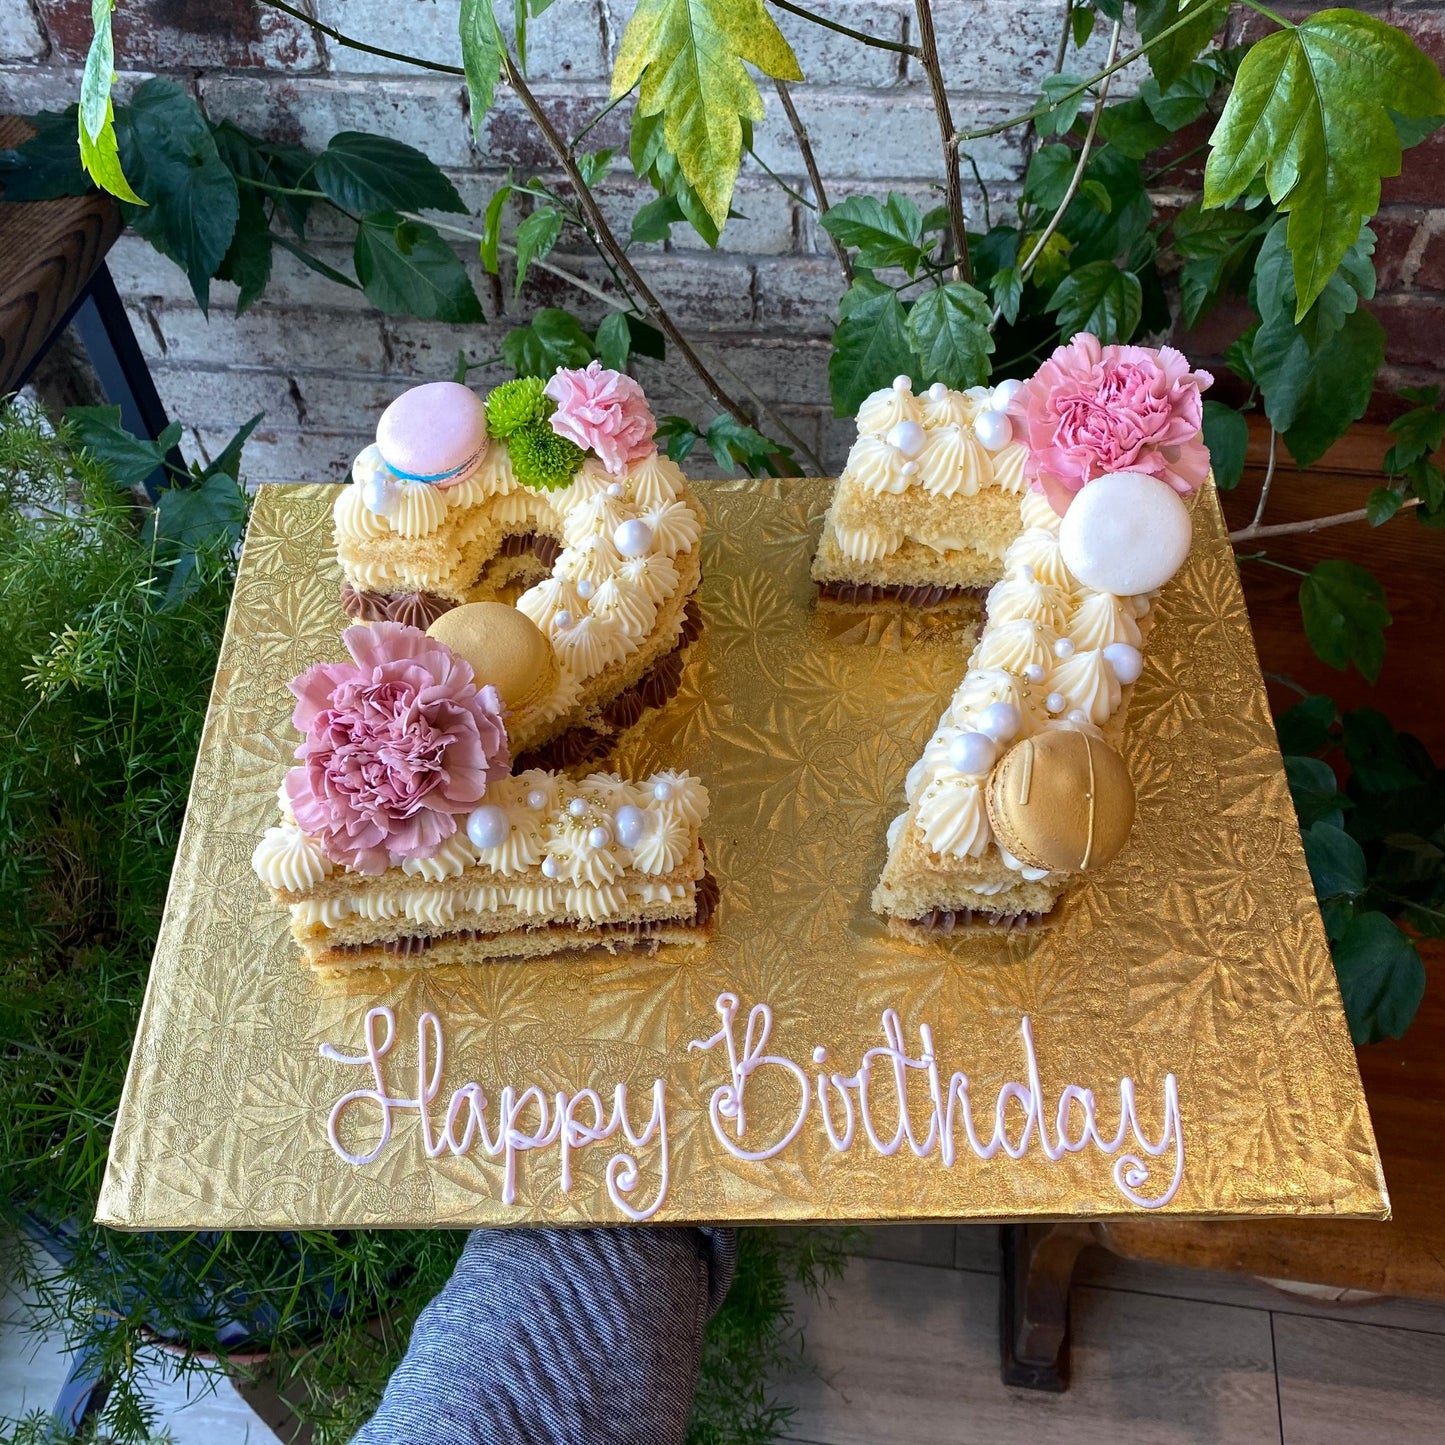 Cakes shaped as the number 27 with macarons and fresh flowers